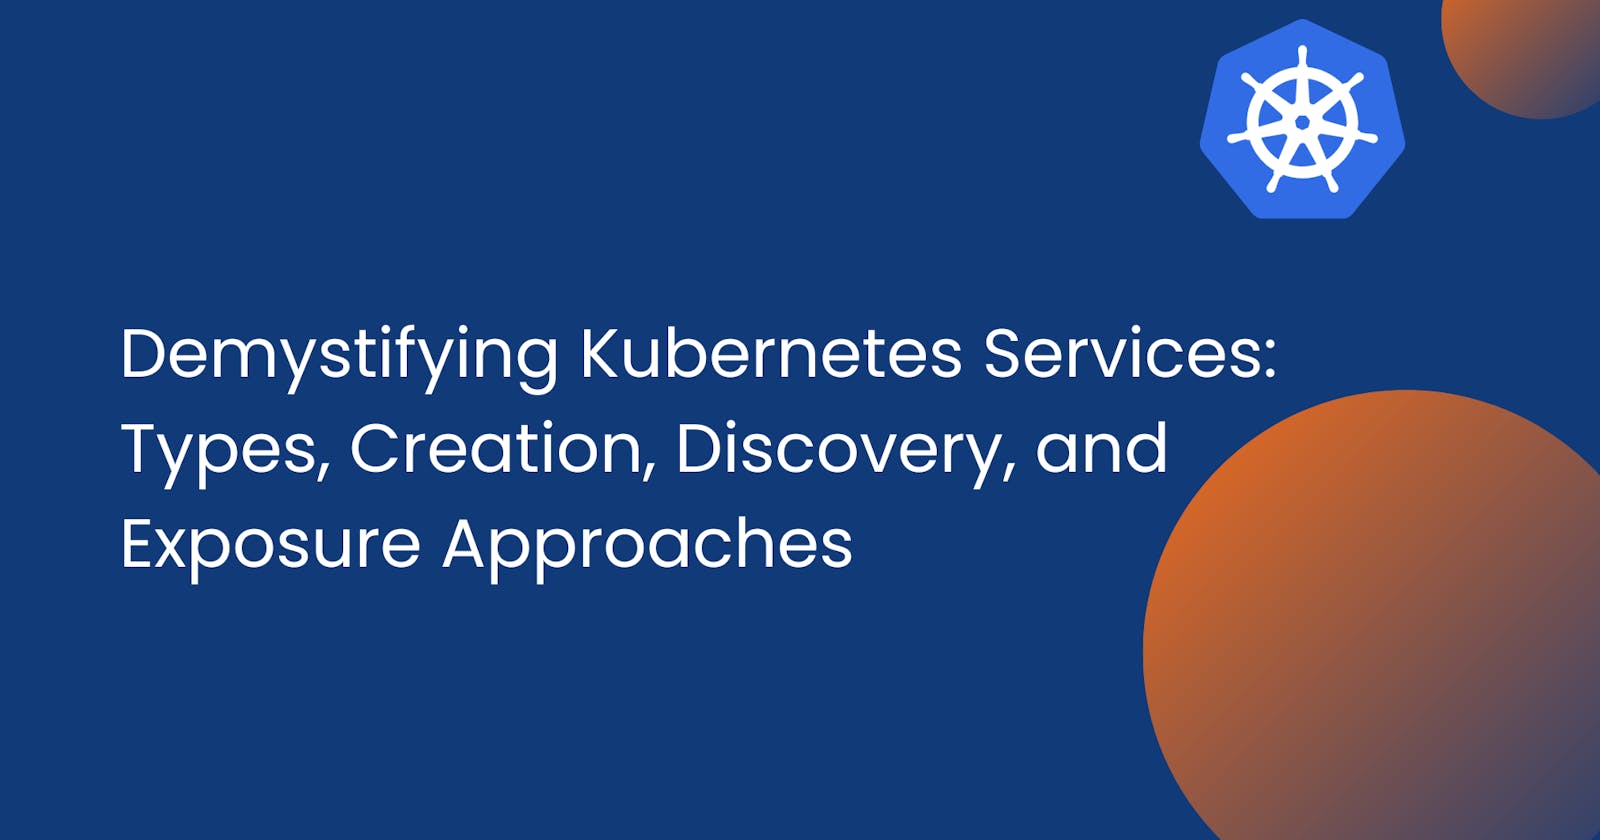 Demystifying Kubernetes Services: Types, Creation, Discovery, and Exposure Approaches